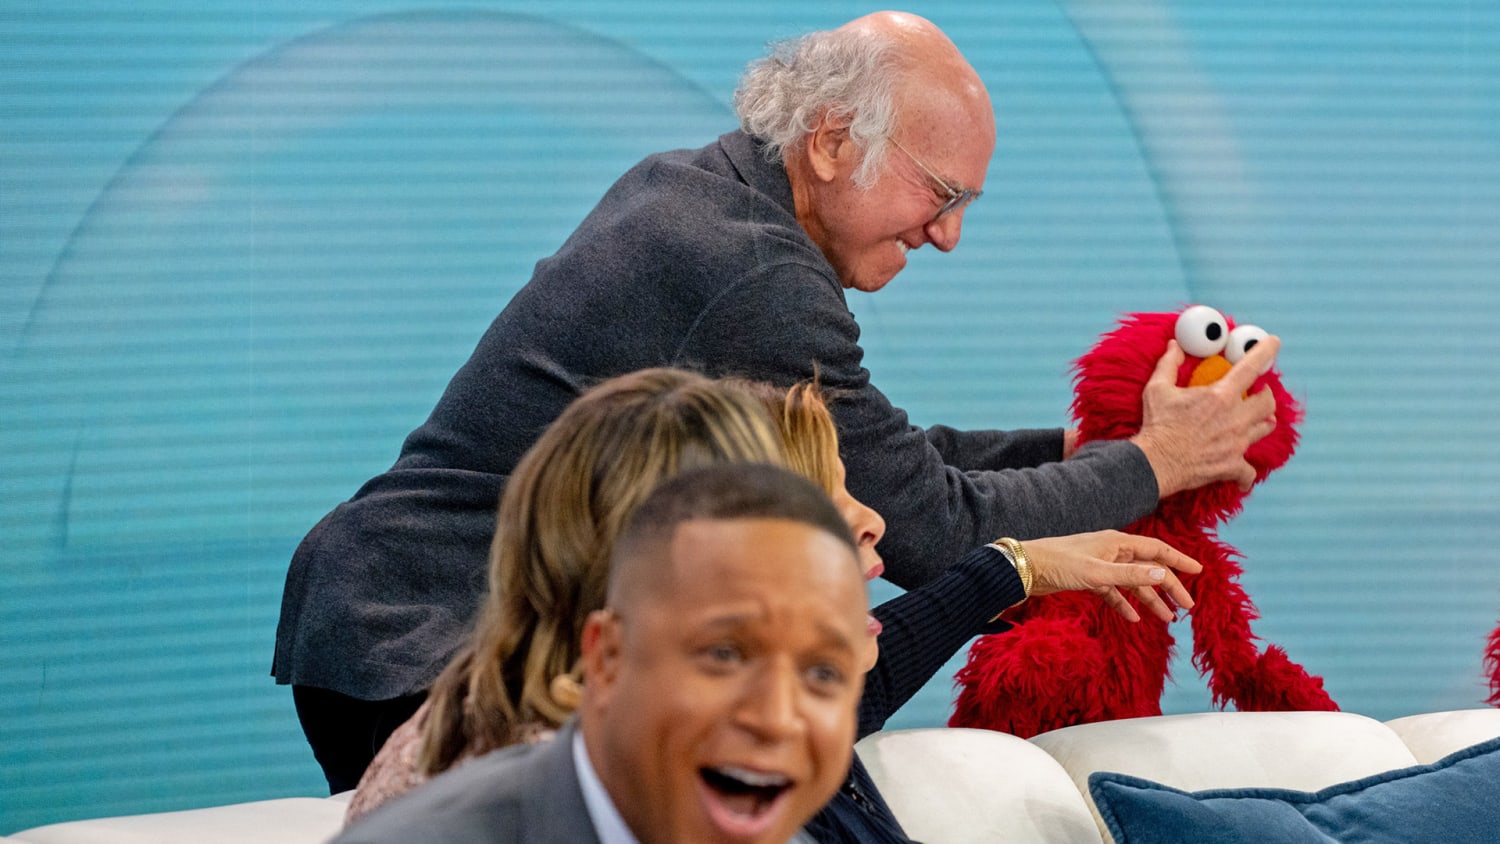 larry-david-playfully-beats-up-elmo-on-today-show-apologizes-right-after